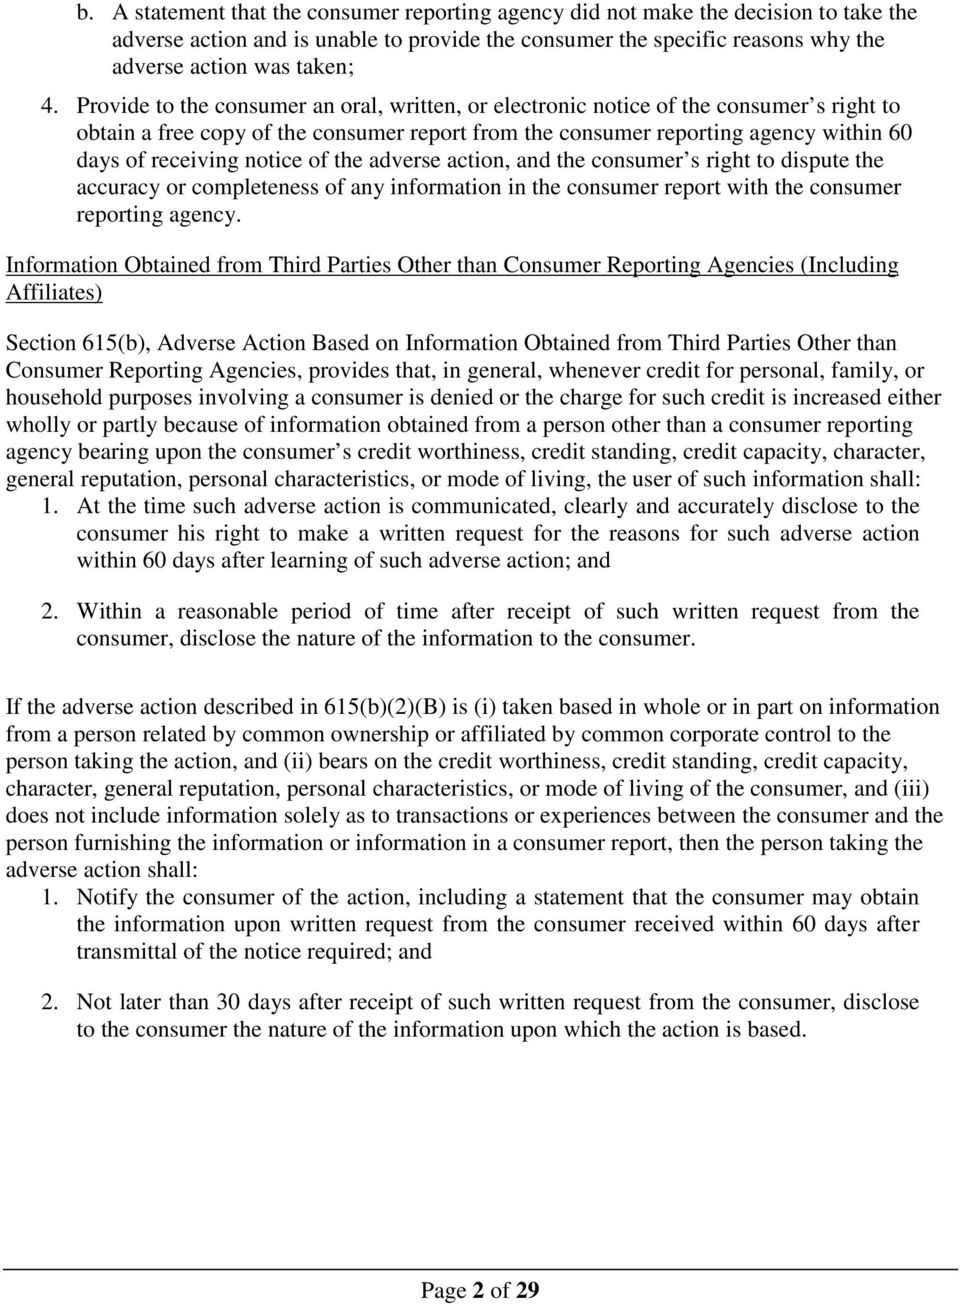 notice of the adverse action, and the consumer s right to dispute the accuracy or completeness of any information in the consumer report with the consumer reporting agency.